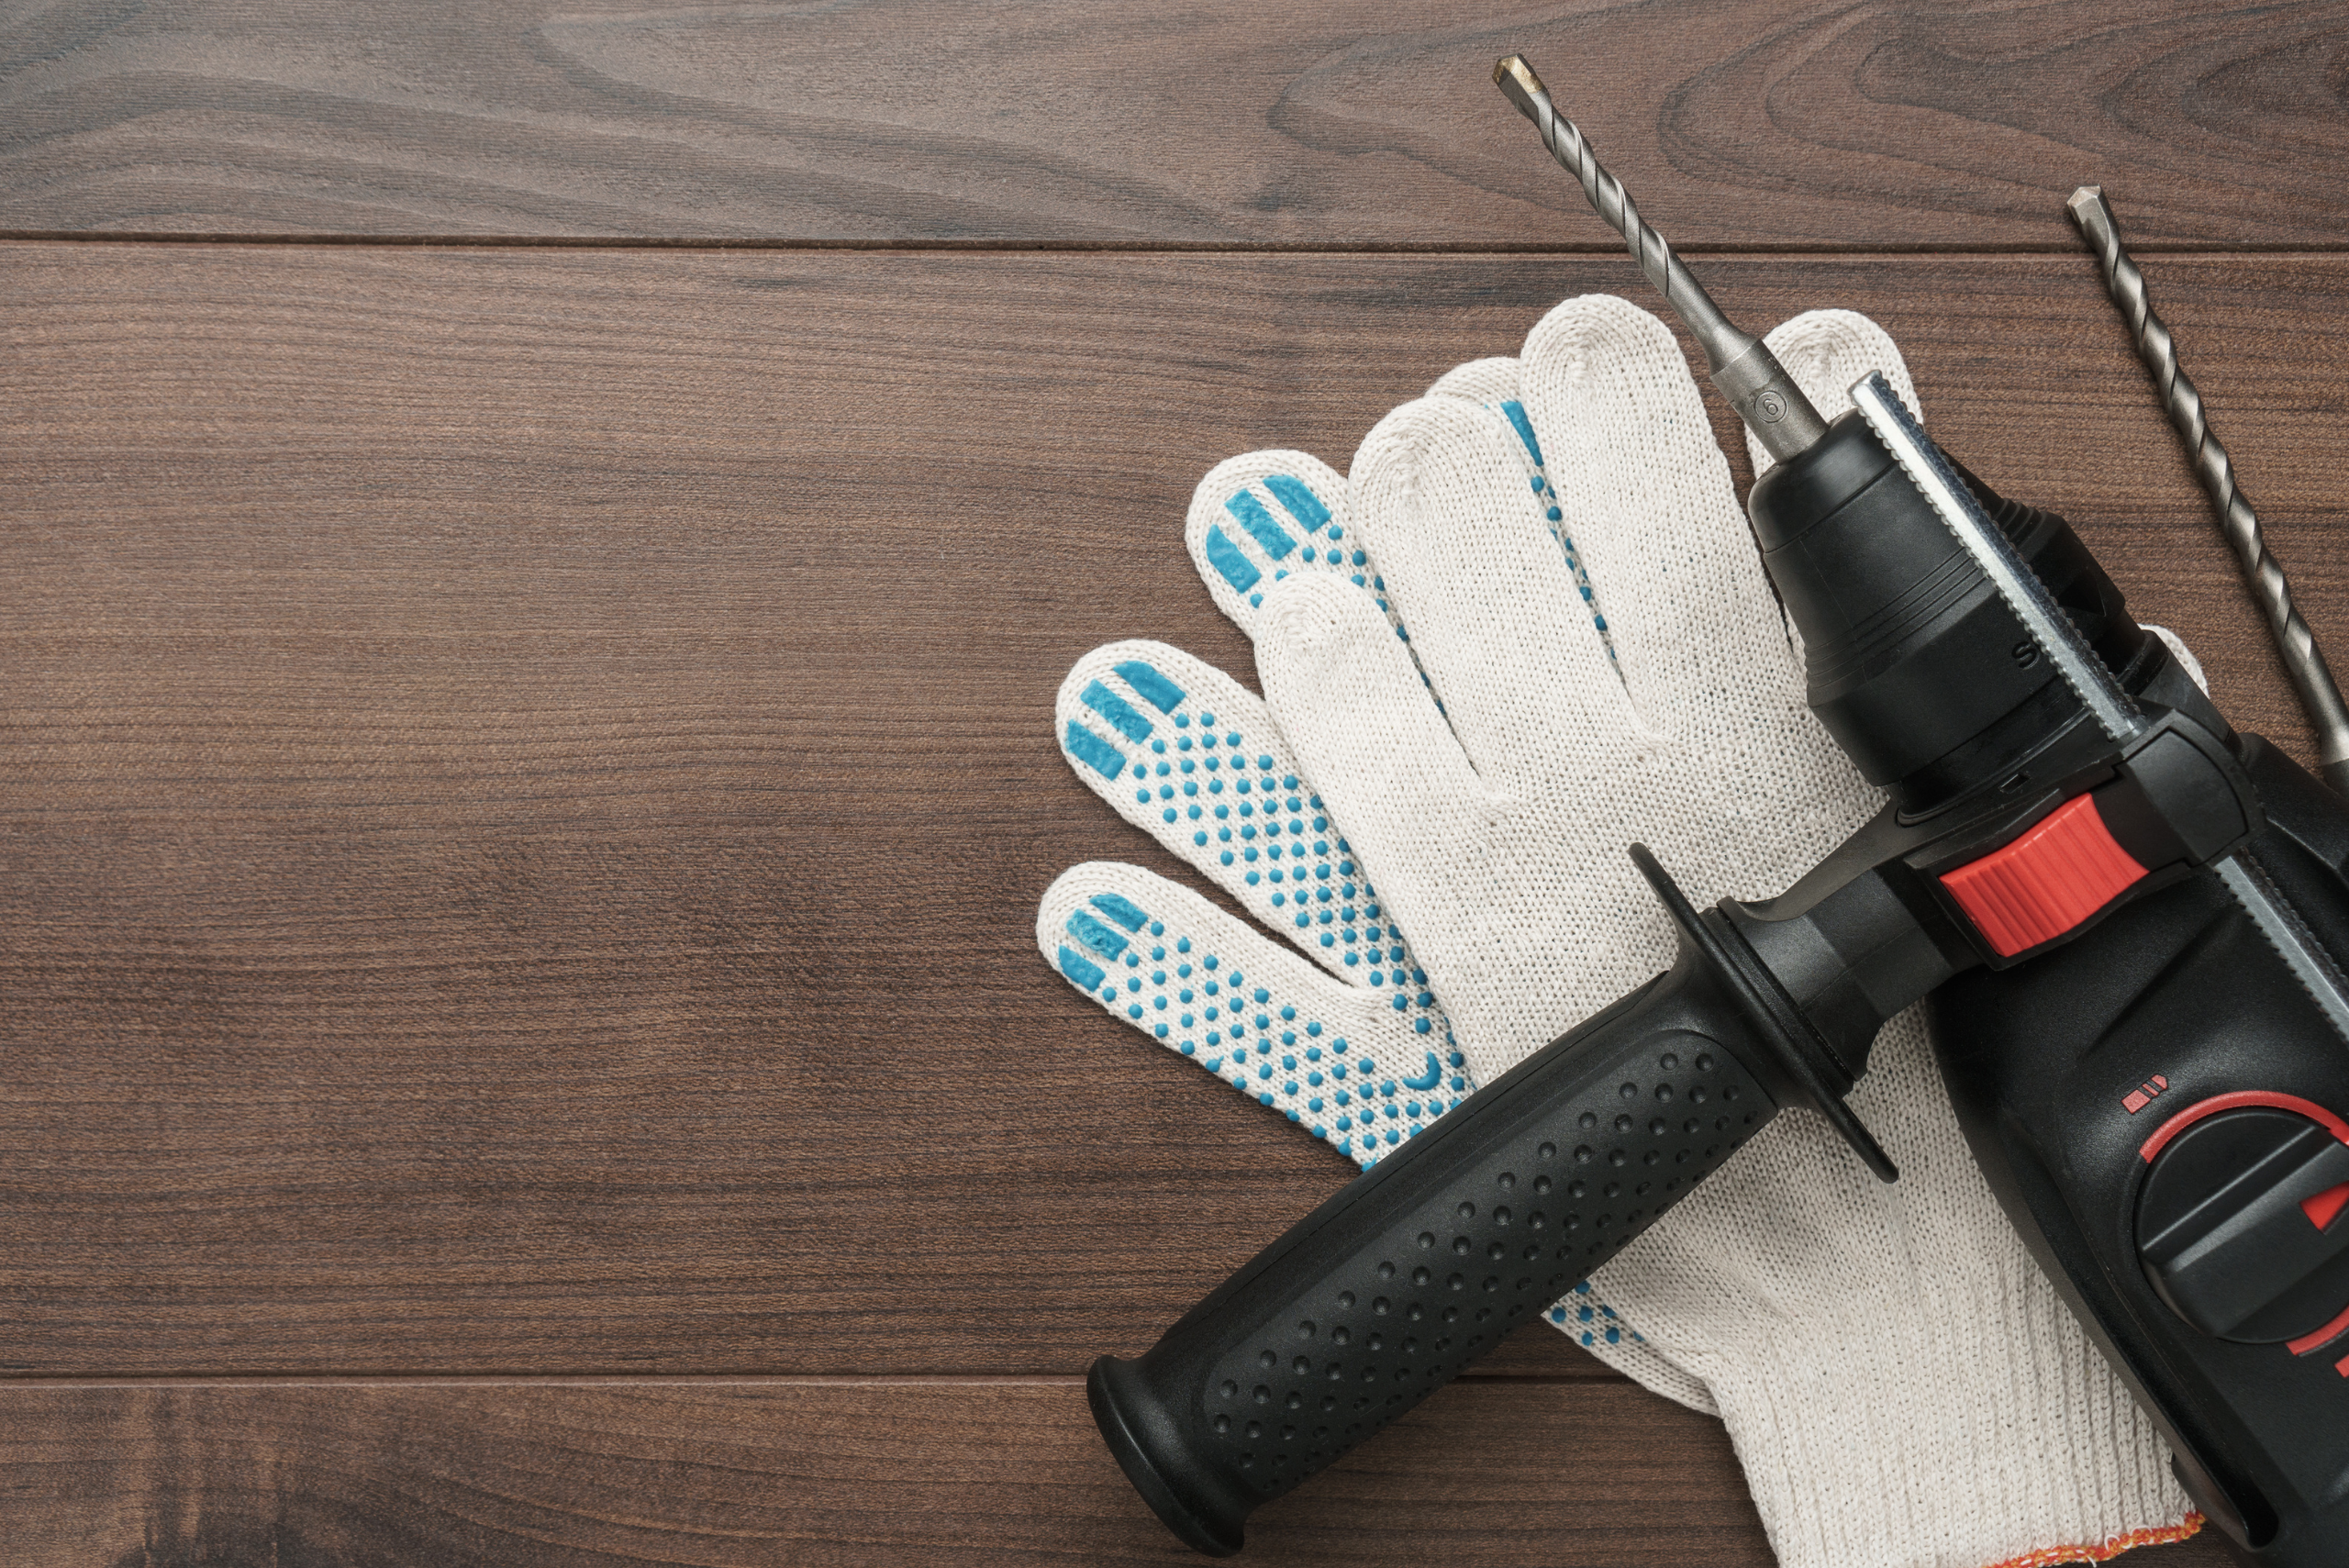 Hammer drill on top of gloves on wood.